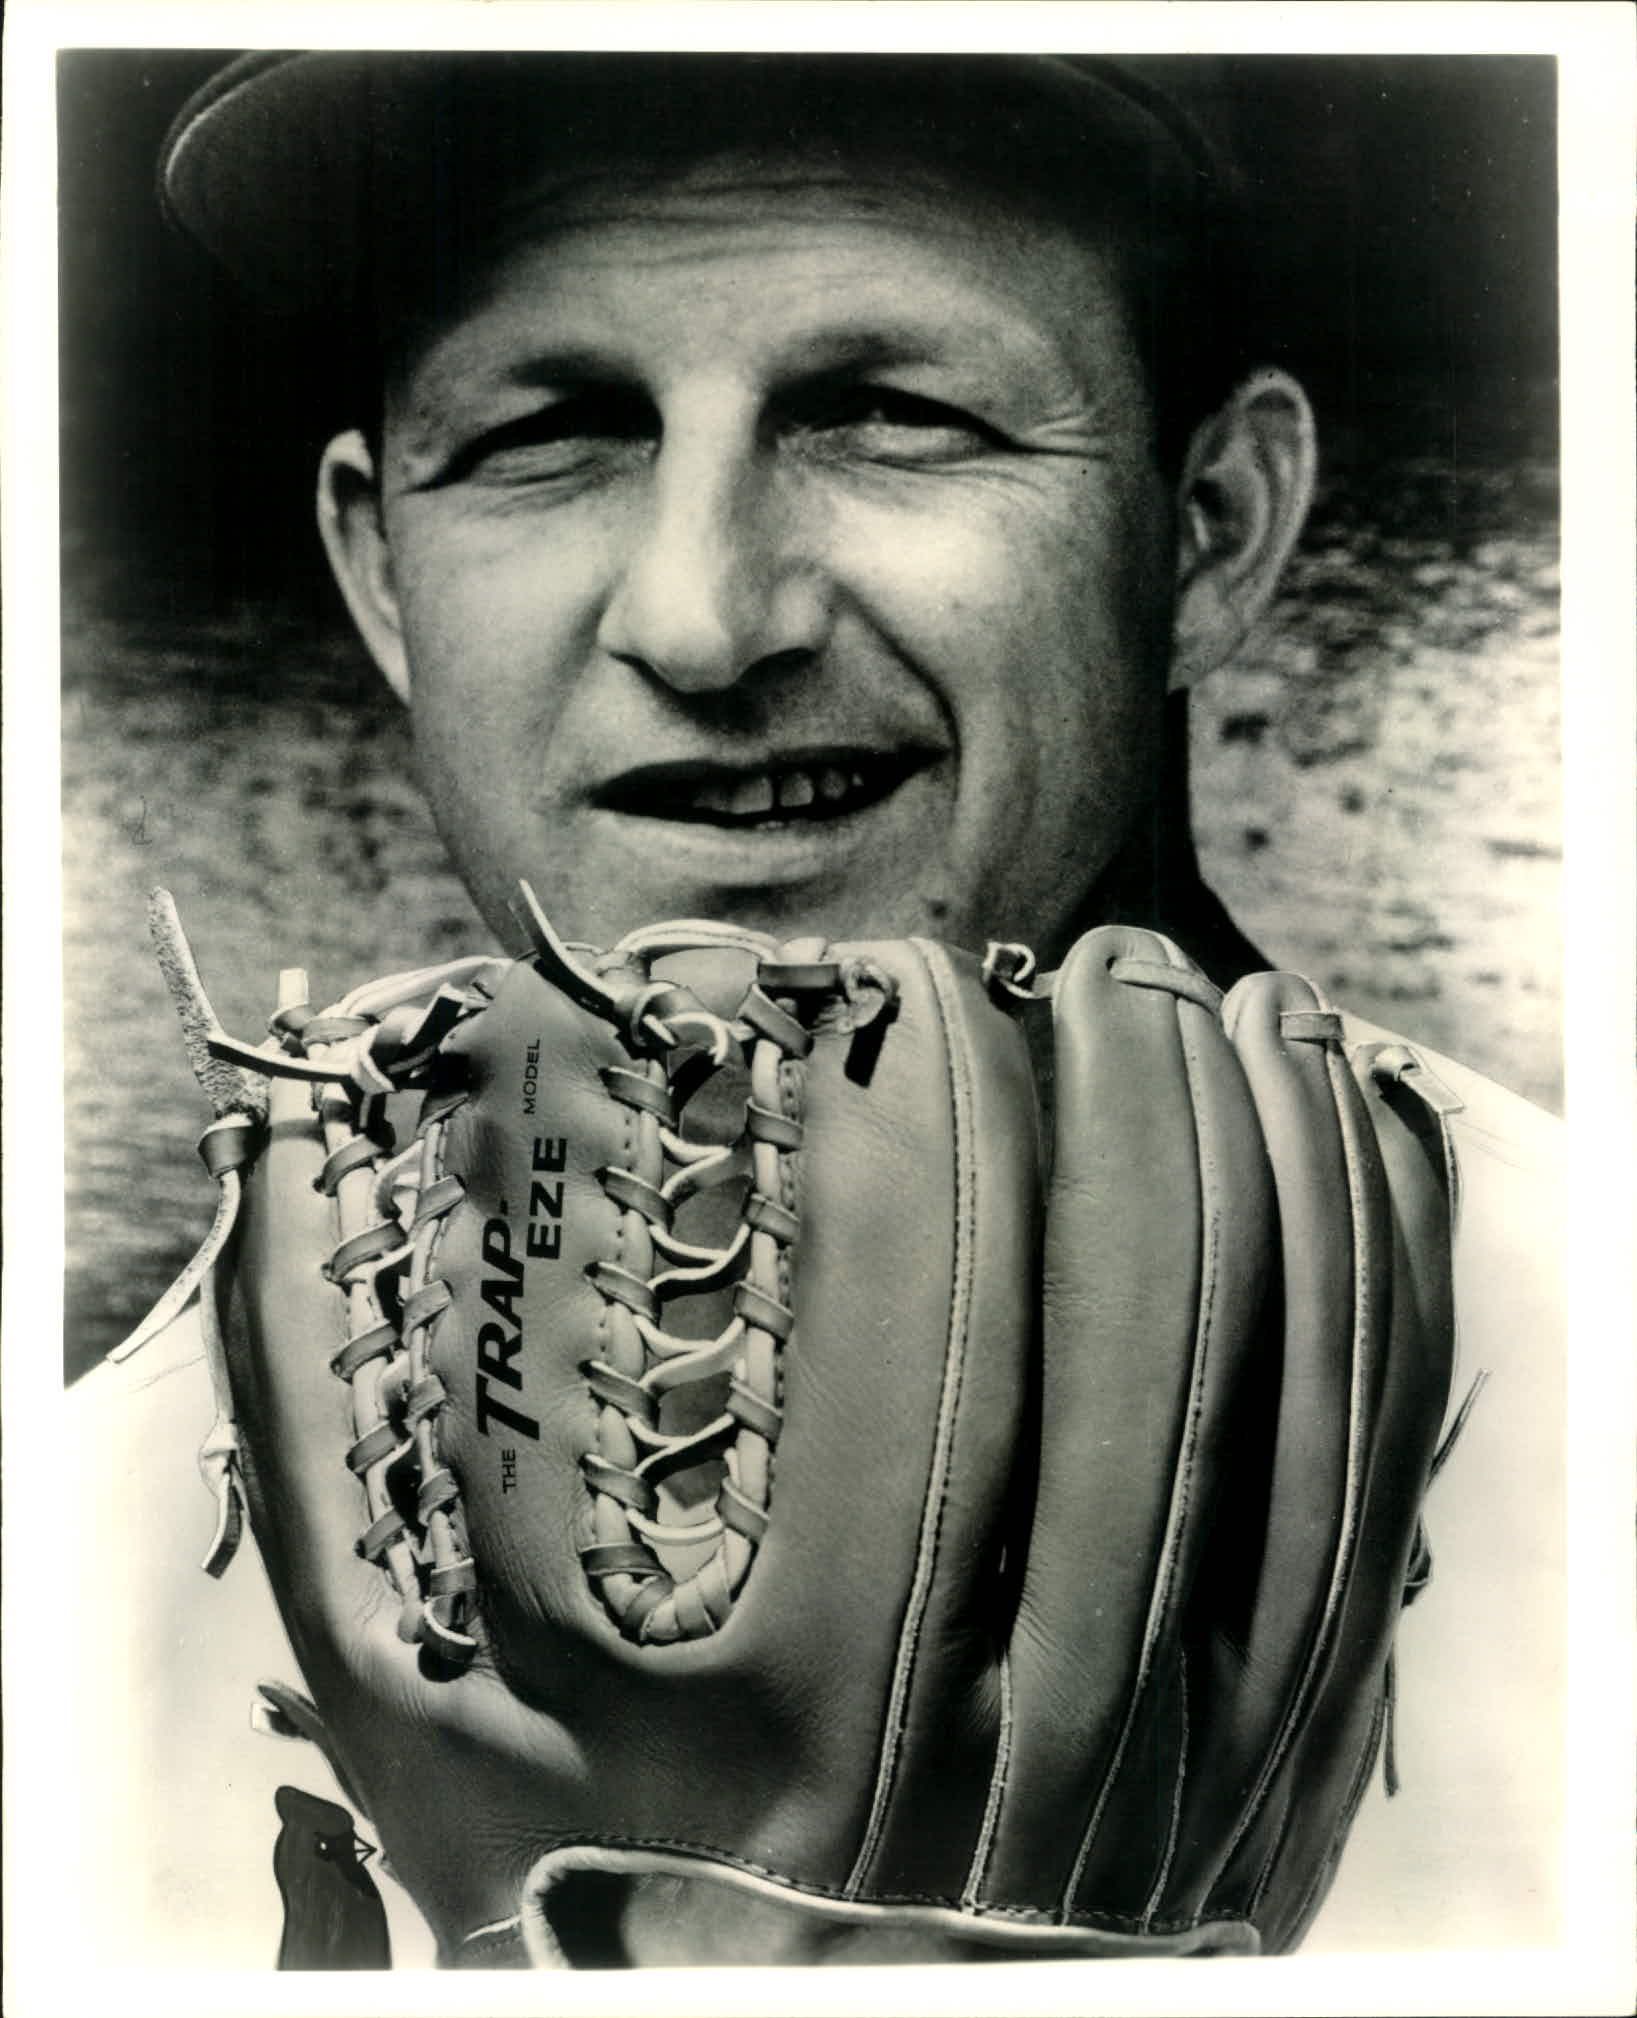 The Sporting Statues Project: Stan Musial: St Louis Cardinals